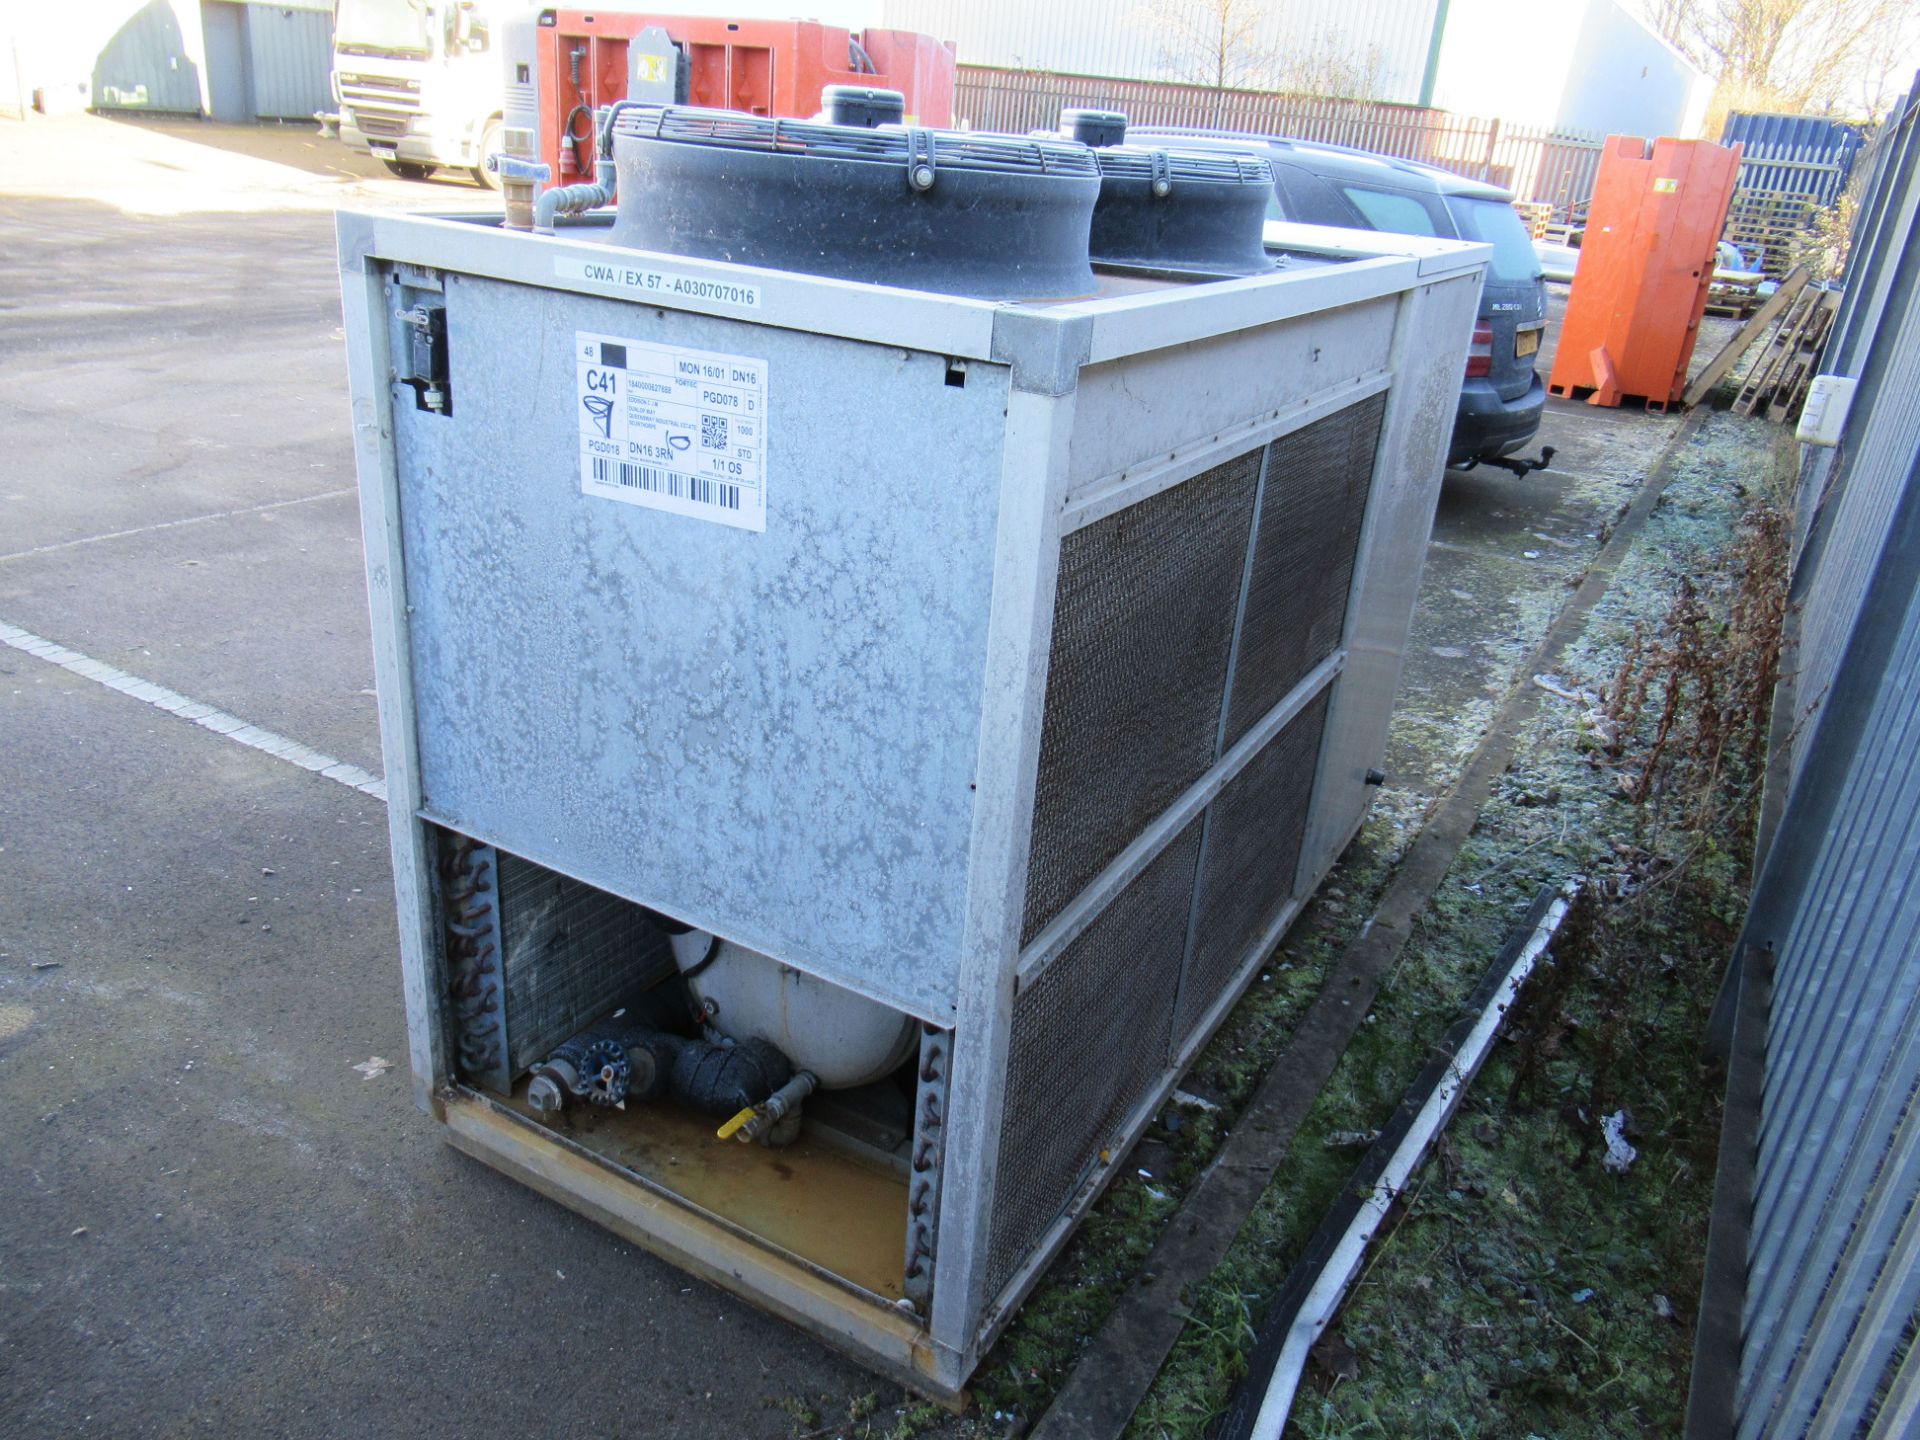 Rhoss industrial water chiller, model number CWA/EX57,66 kW cooling capacity - Image 5 of 14